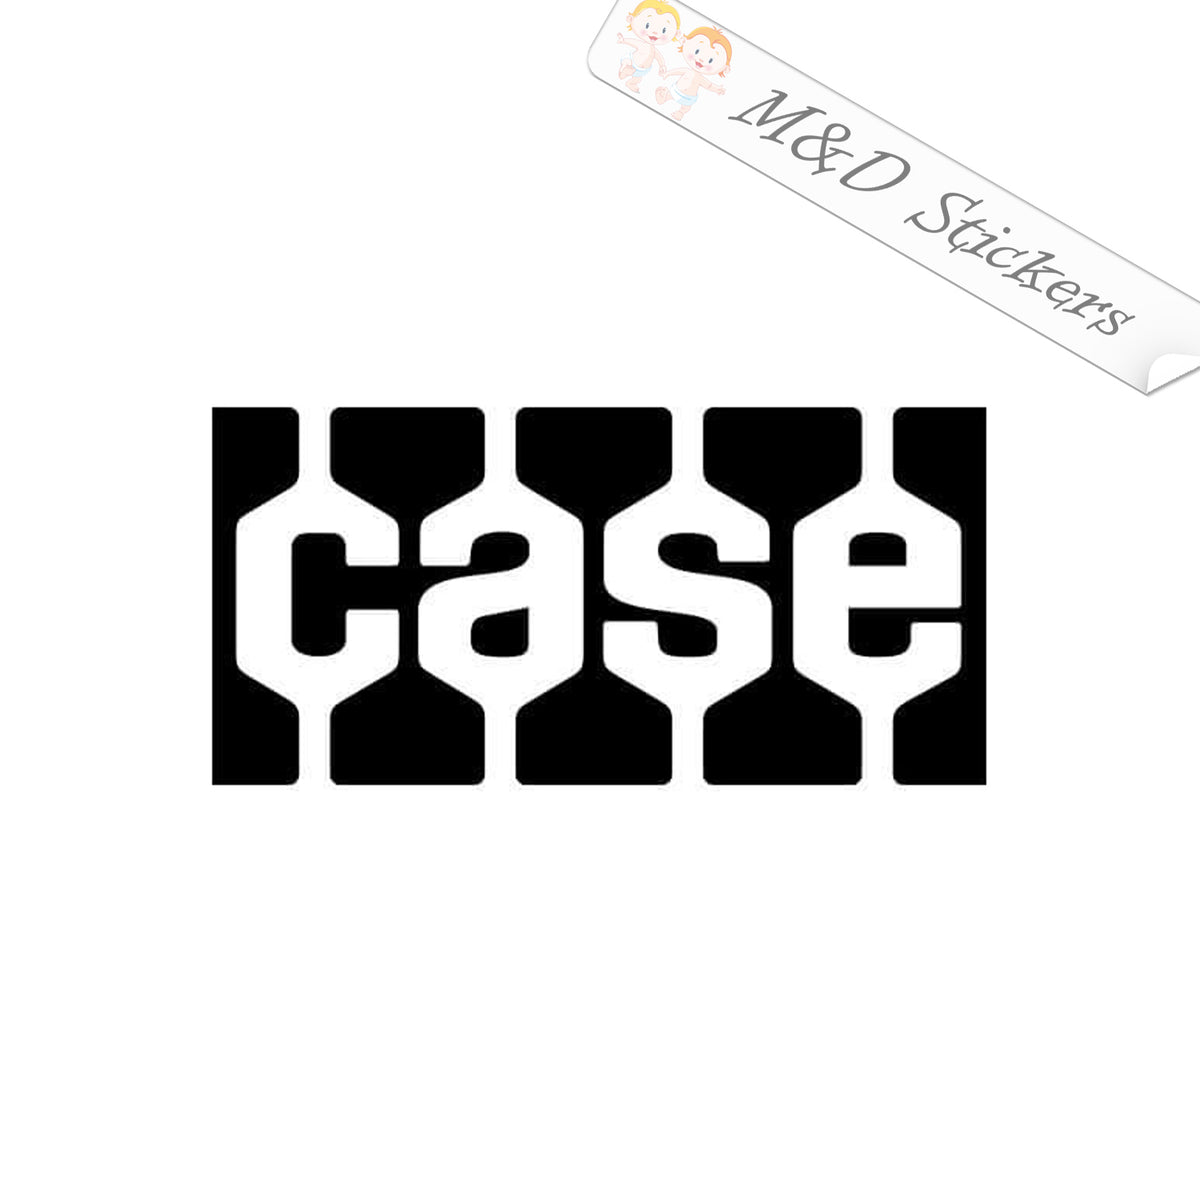 2x Case Tractors Logo Vinyl Decal Sticker Different Colors And Size For Mandd Stickers 